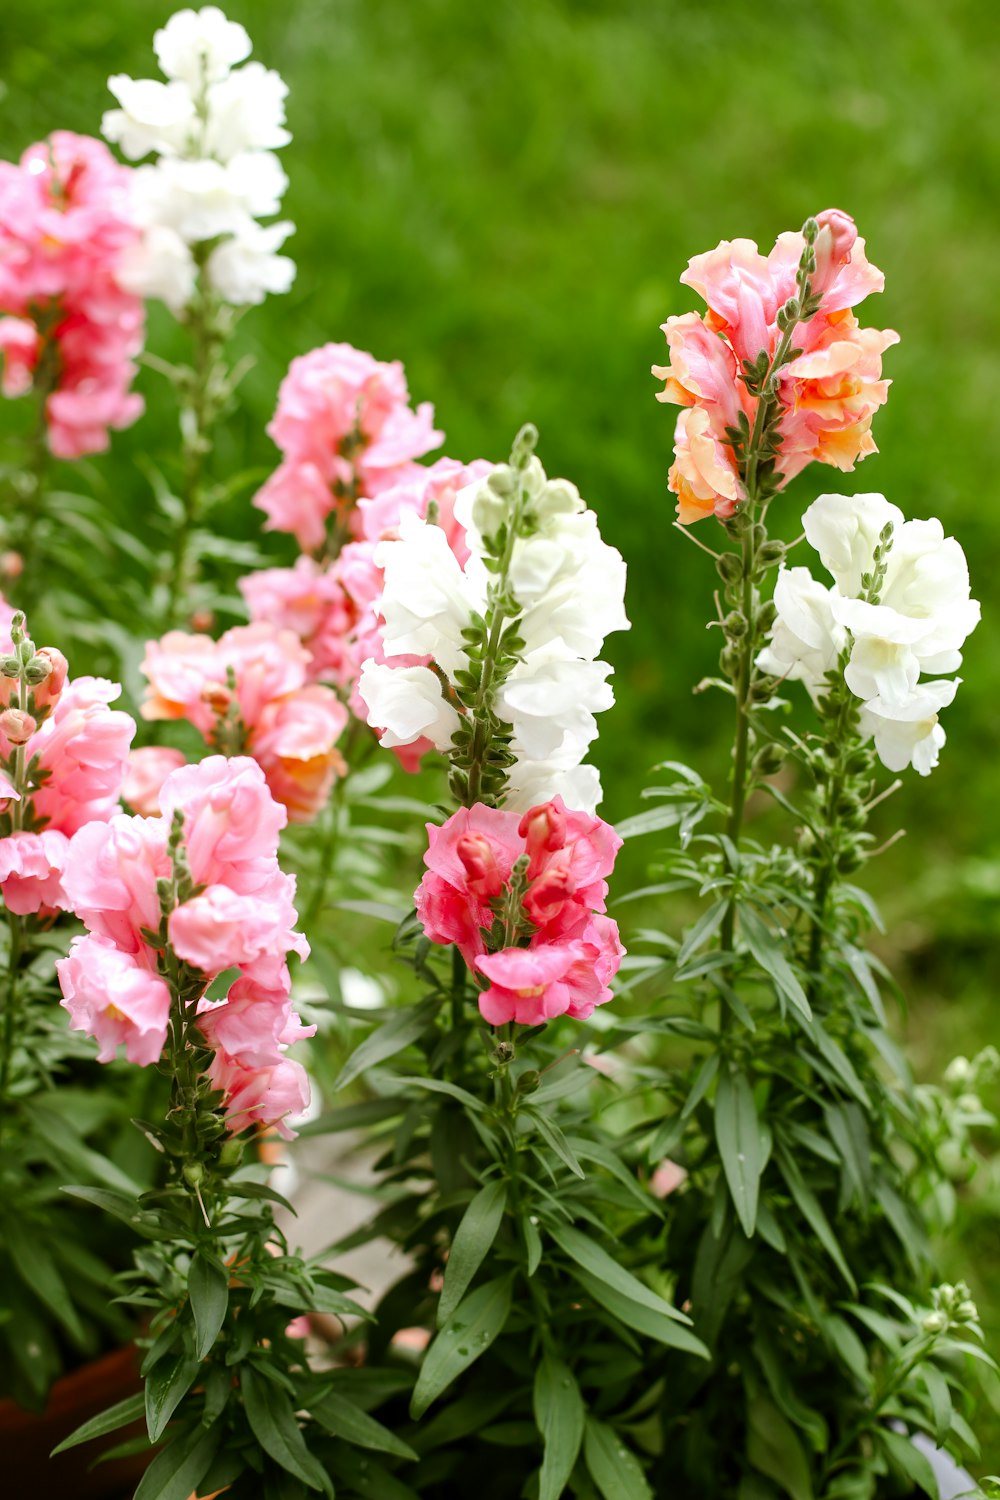 a group of pink and white flowers in a pot